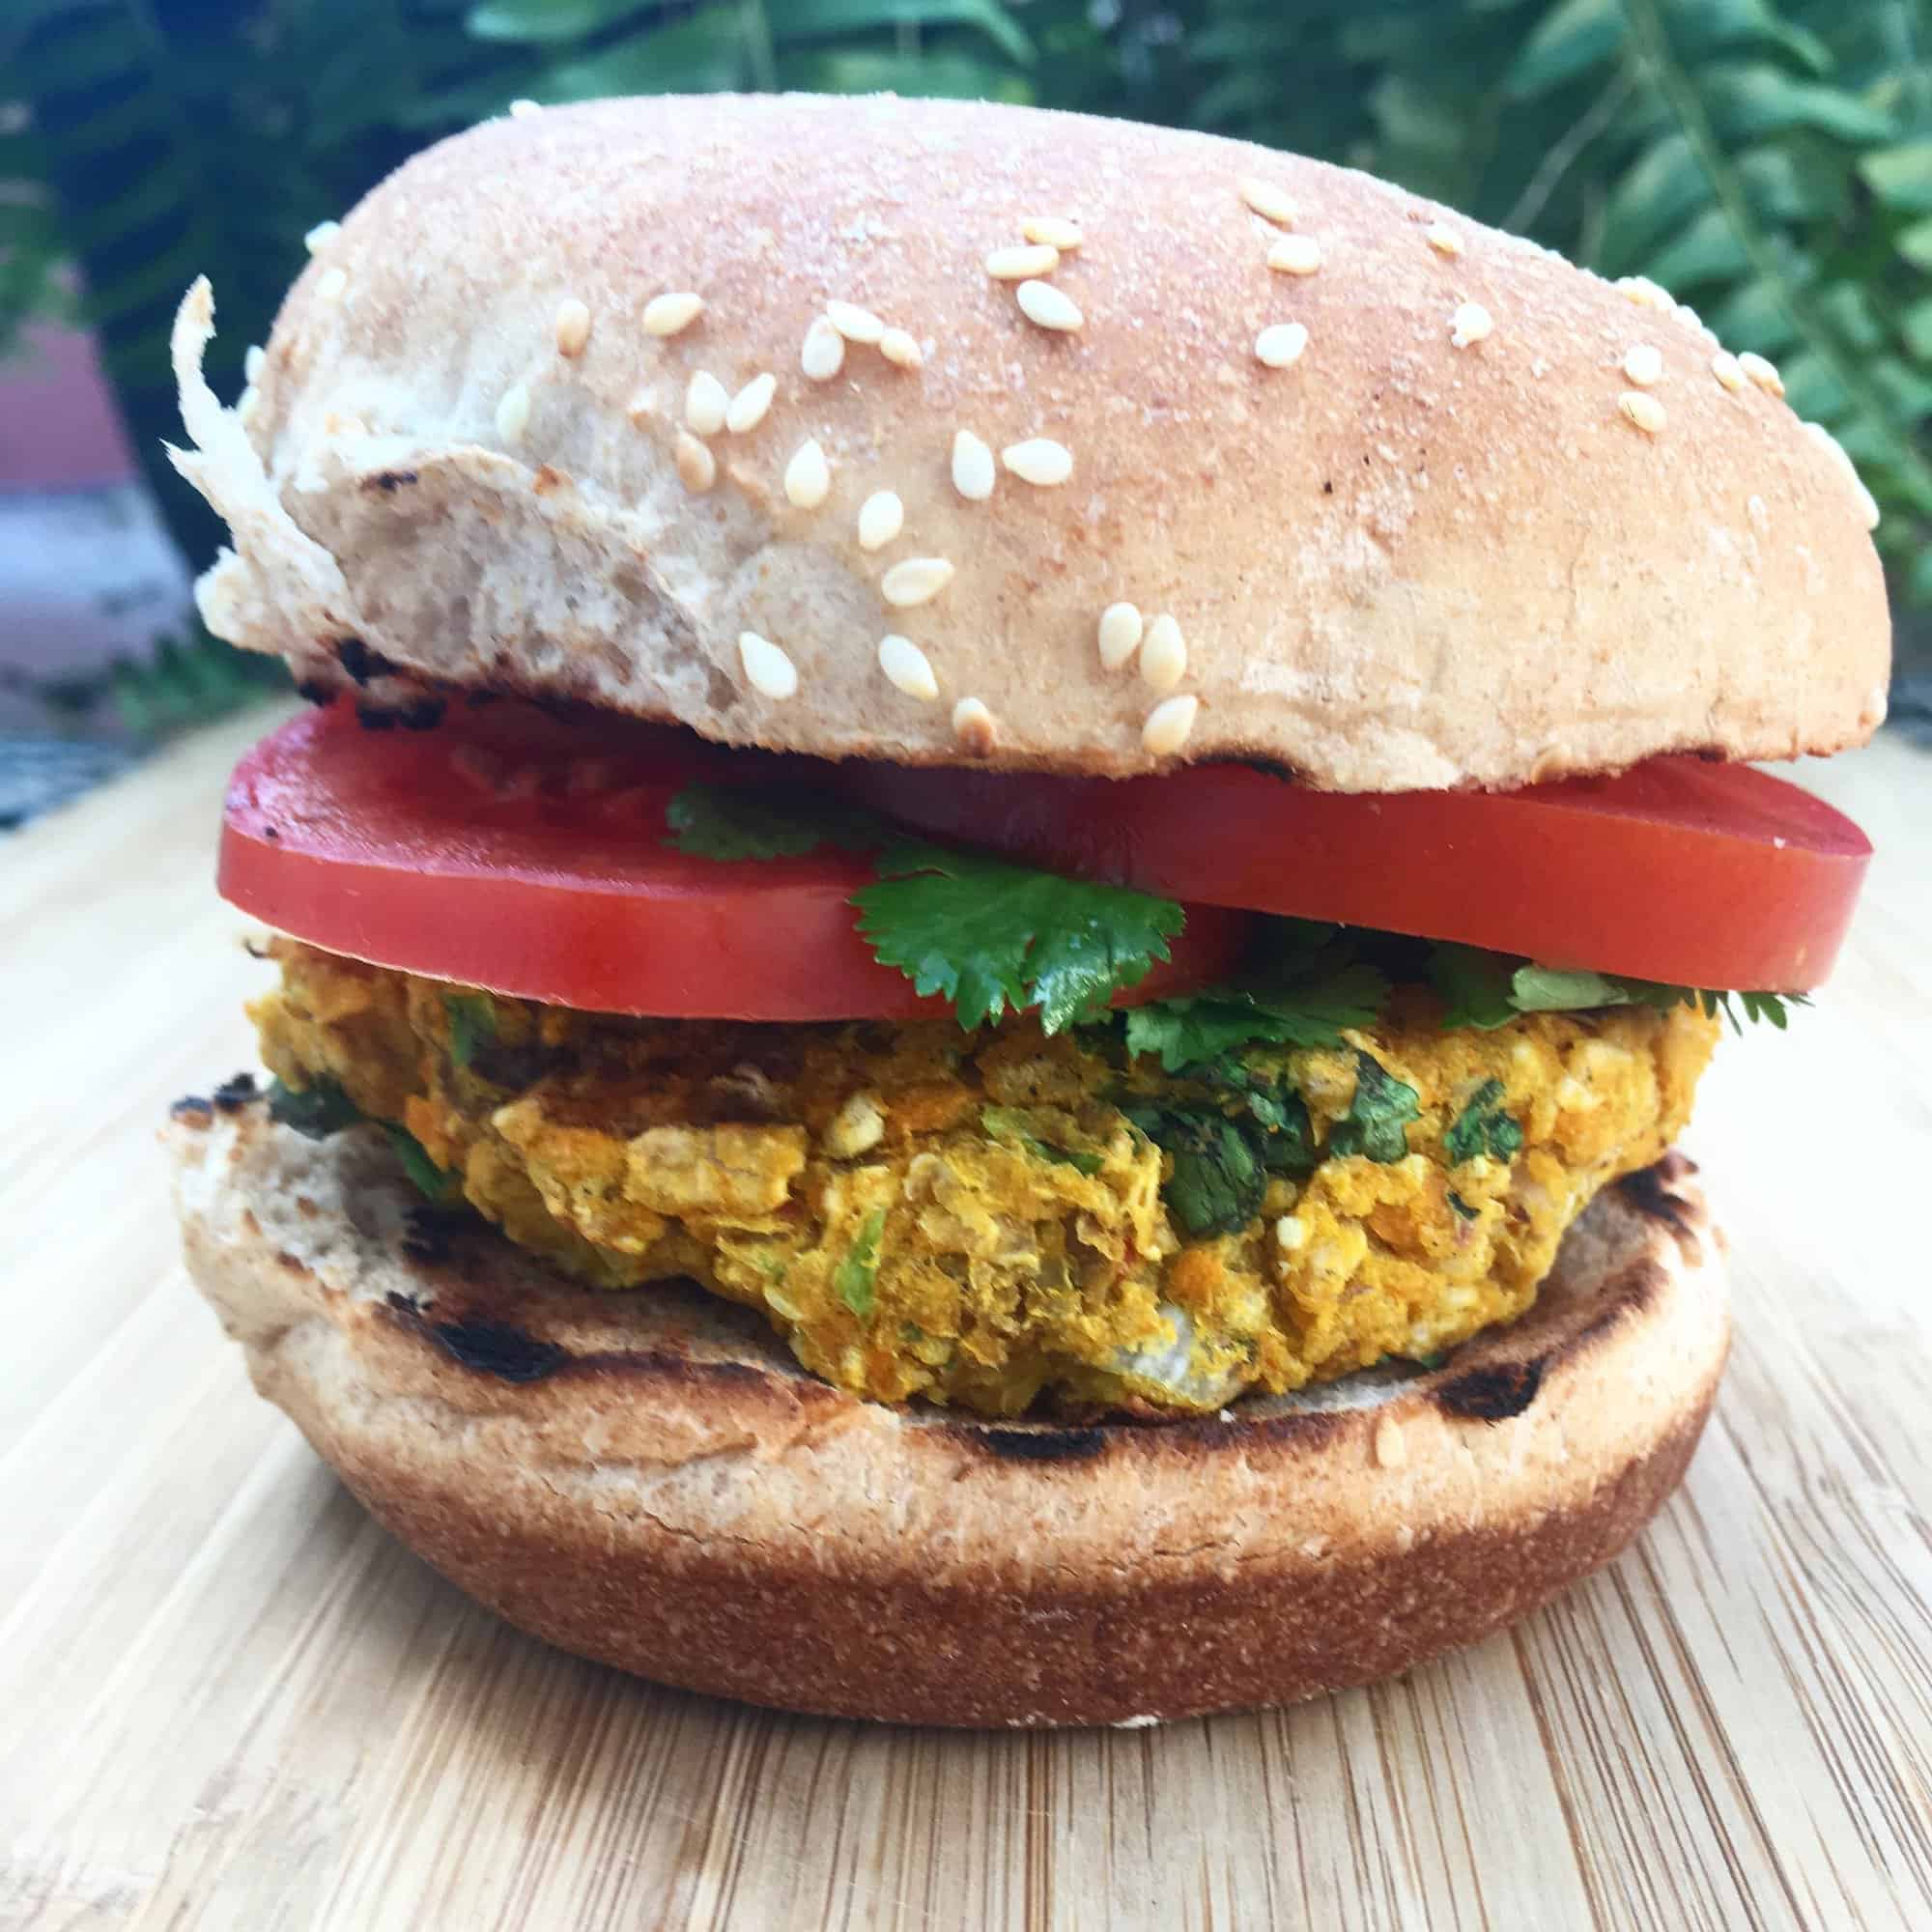 Actually Grill-able Veggie Burgers